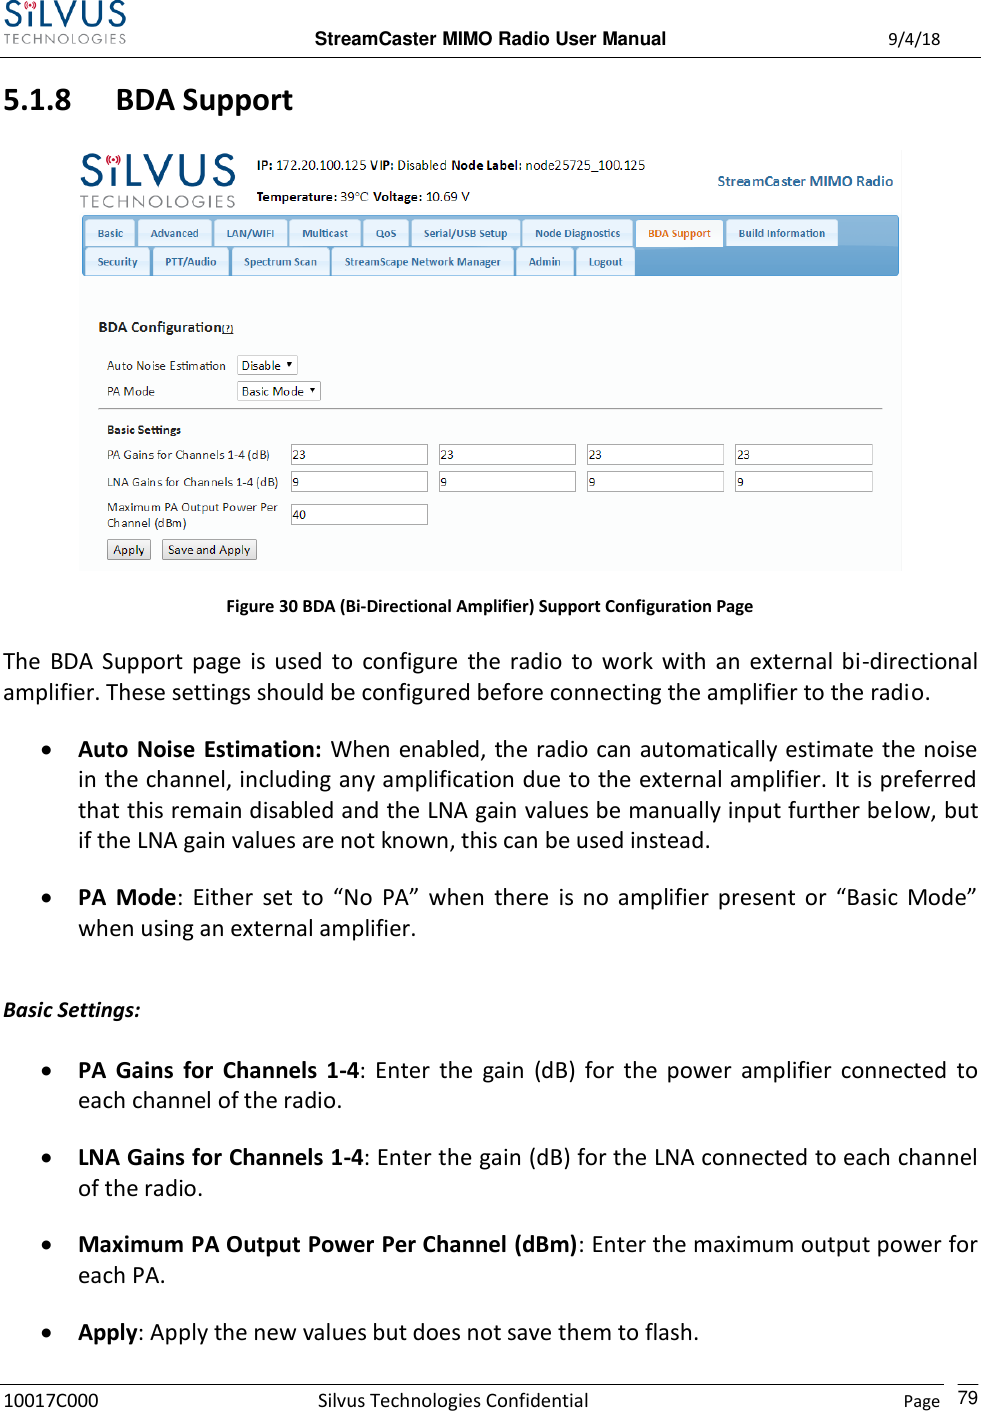  StreamCaster MIMO Radio User Manual  9/4/18 10017C000 Silvus Technologies Confidential    Page    79 5.1.8 BDA Support  Figure 30 BDA (Bi-Directional Amplifier) Support Configuration Page The  BDA  Support  page  is  used  to  configure  the  radio  to  work  with  an  external  bi-directional amplifier. These settings should be configured before connecting the amplifier to the radio.  Auto Noise  Estimation: When enabled, the radio can automatically estimate the noise in the channel, including any amplification due to the external amplifier. It is preferred that this remain disabled and the LNA gain values be manually input further below, but if the LNA gain values are not known, this can be used instead.  PA  Mode:  Either  set  to  “No  PA”  when  there  is  no  amplifier  present  or  “Basic  Mode” when using an external amplifier.  Basic Settings:  PA  Gains  for  Channels  1-4:  Enter  the  gain  (dB)  for  the  power  amplifier  connected  to each channel of the radio.  LNA Gains for Channels 1-4: Enter the gain (dB) for the LNA connected to each channel of the radio.  Maximum PA Output Power Per Channel (dBm): Enter the maximum output power for each PA.  Apply: Apply the new values but does not save them to flash. 